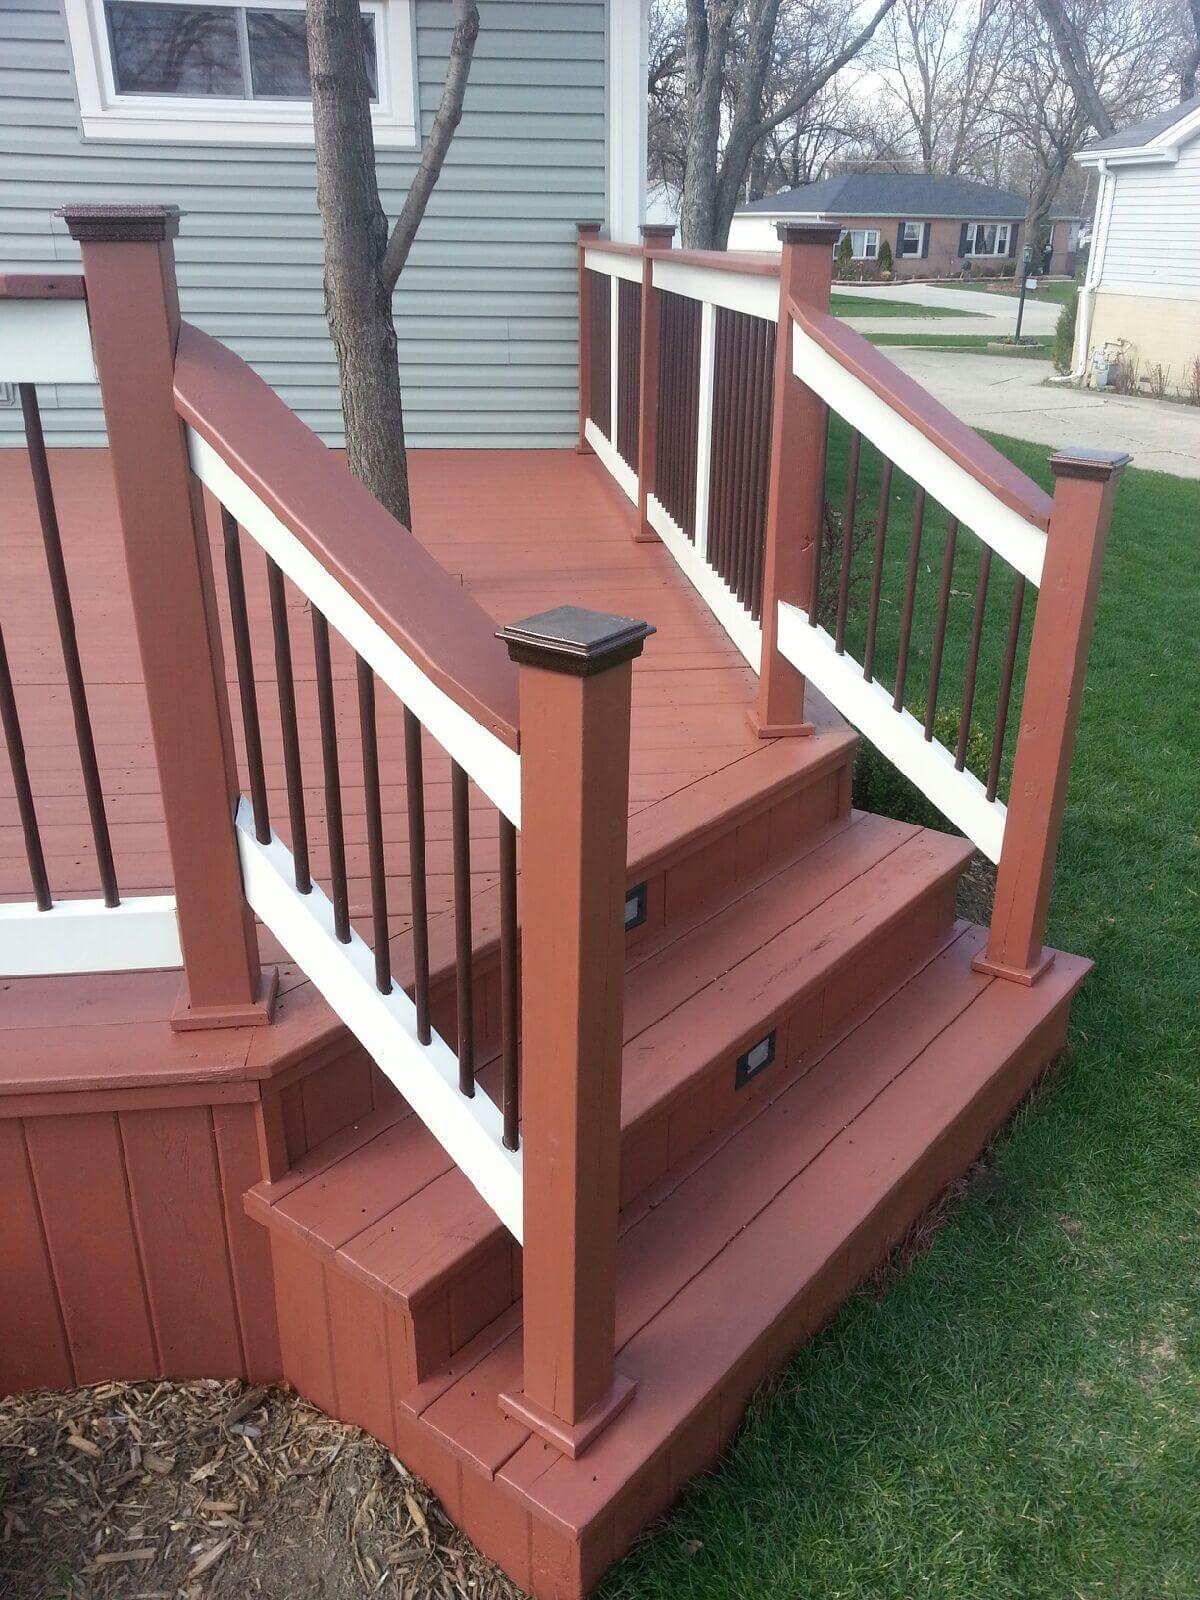 Repairs and maintenance for your deck, fence, and exterior wood staining. - Deck Staining Vernon Hills - Deck Cleaning Services